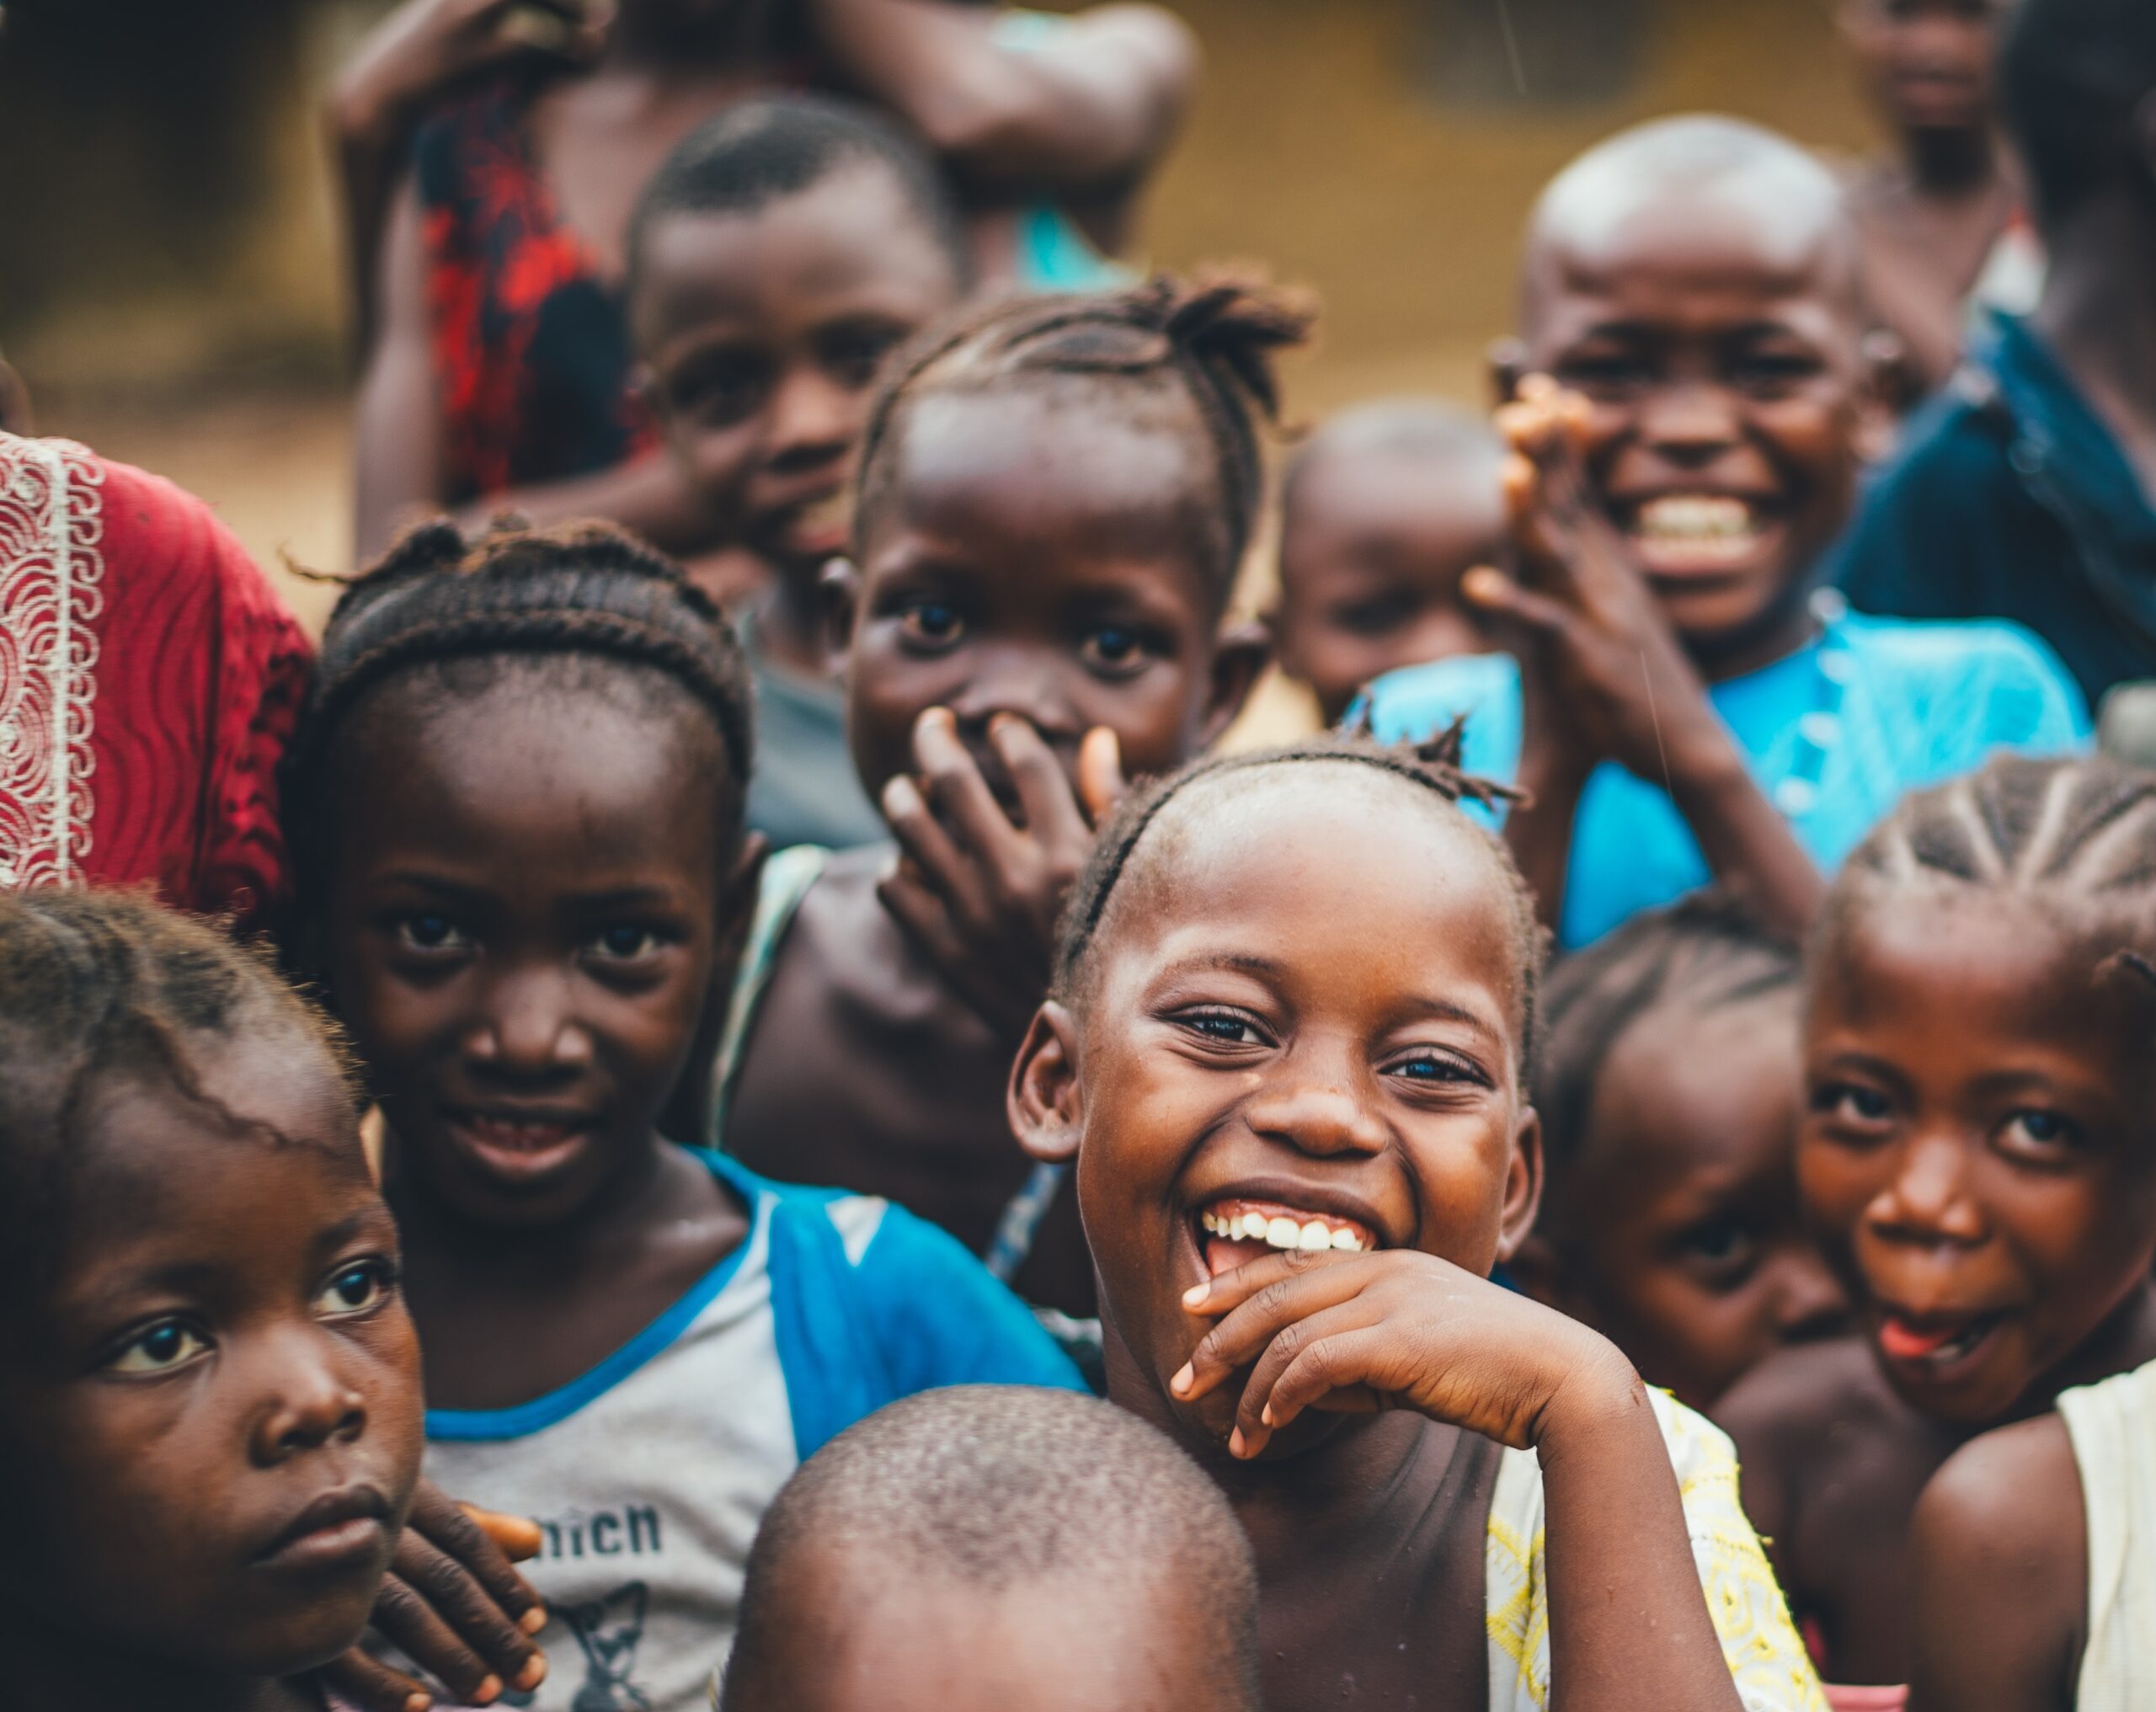 Taken on a trip in 2016 with World Vision to Sierra Leone. Releases obtained See all the photos in this set at: https://unsplash.com/collections/1329084/free-photos-of-sierra-leone